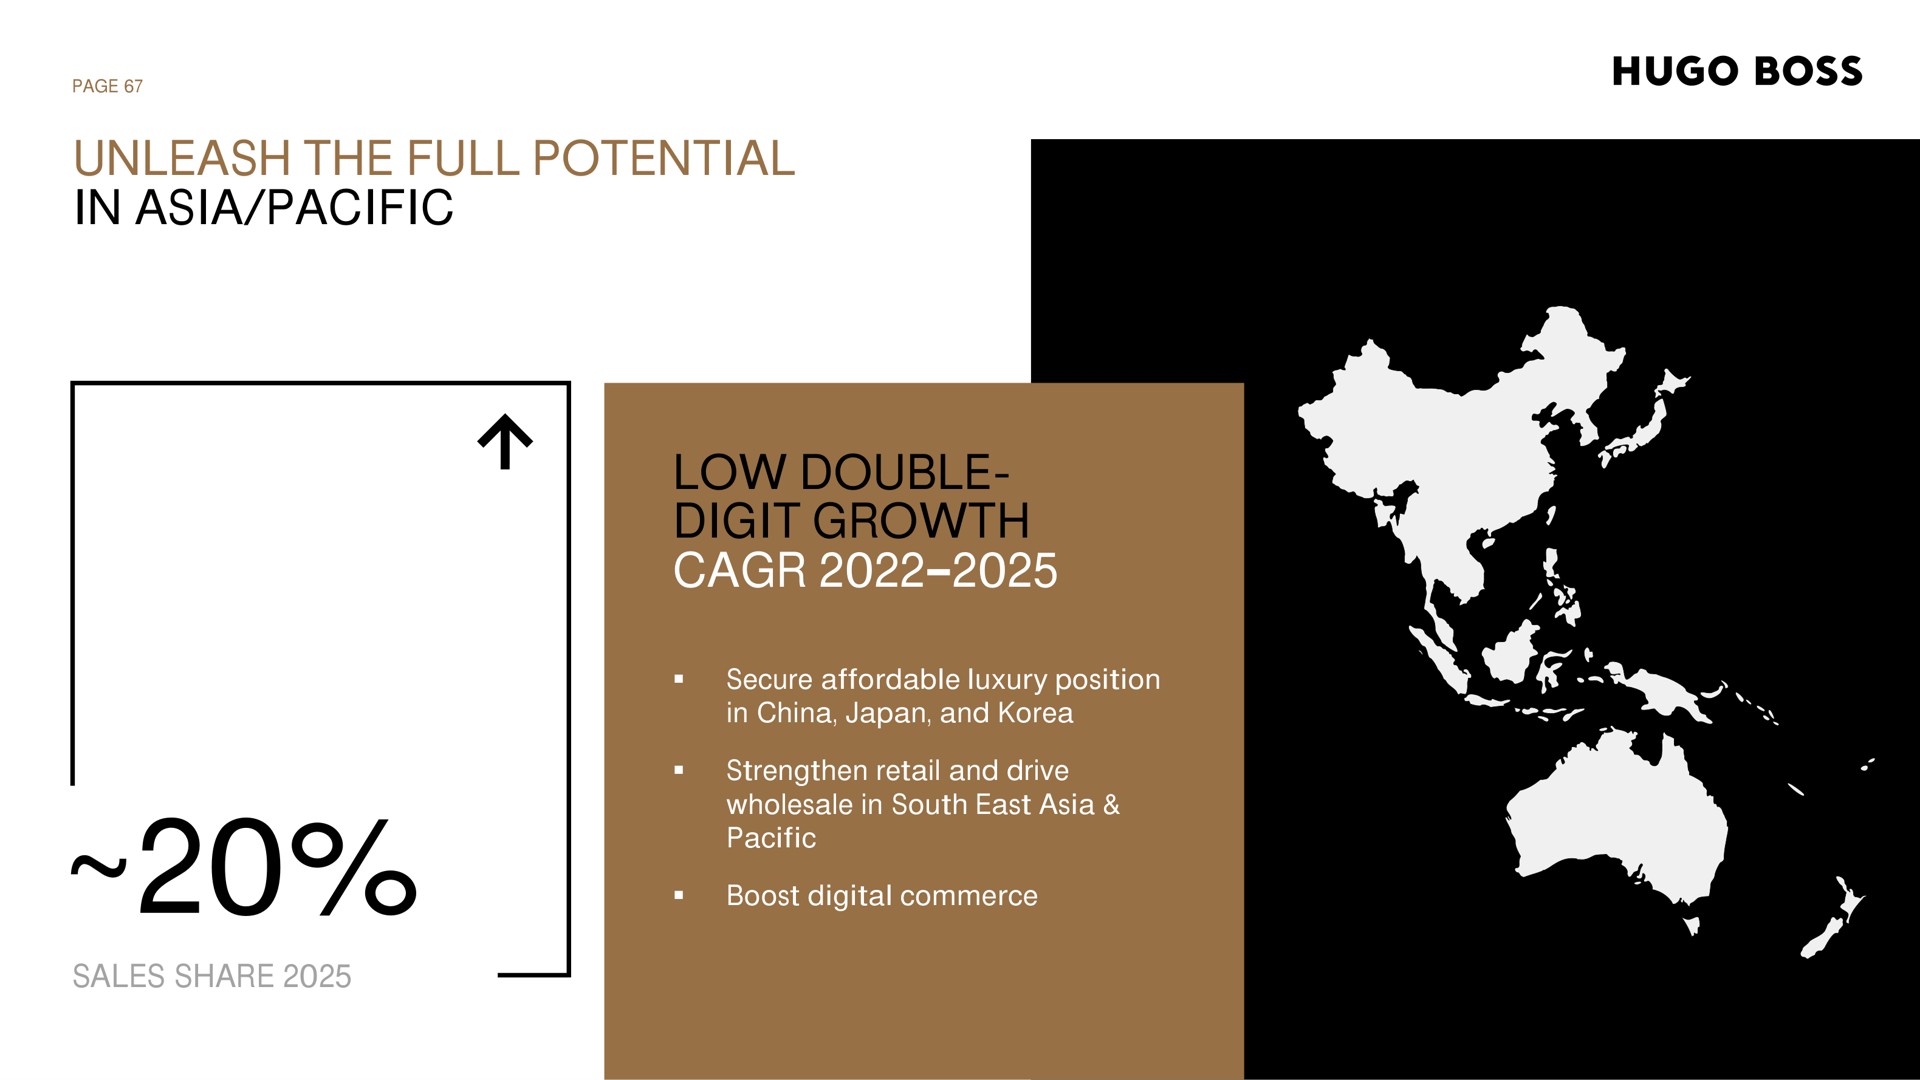 unleash the full potential in pacific low double digit growth boss | Hugo Boss